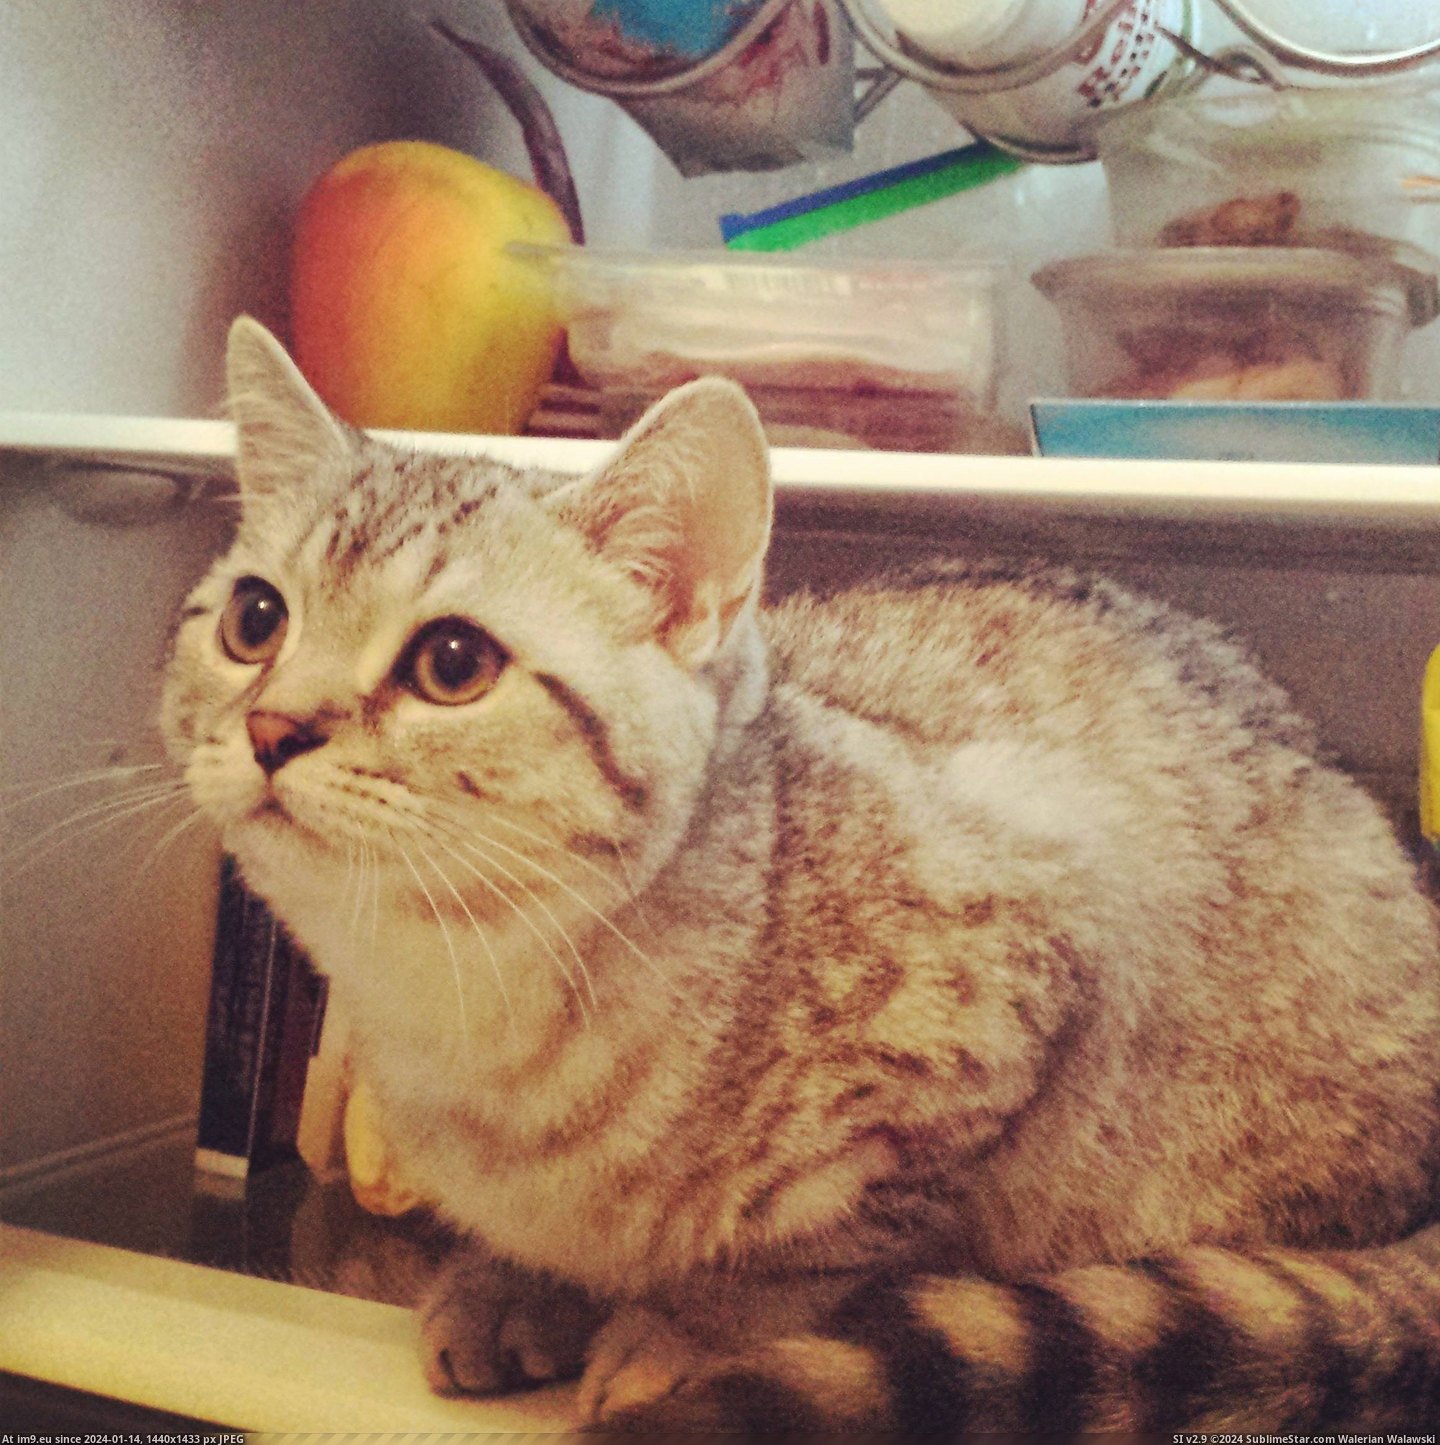 #Hot #Leave #Refuses #Jumped #Gary #Opened #Fridge [Aww] It's really hot at home, so when I opened the fridge Gary jumped in and now refuses to leave -.-' Pic. (Изображение из альбом My r/AWW favs))